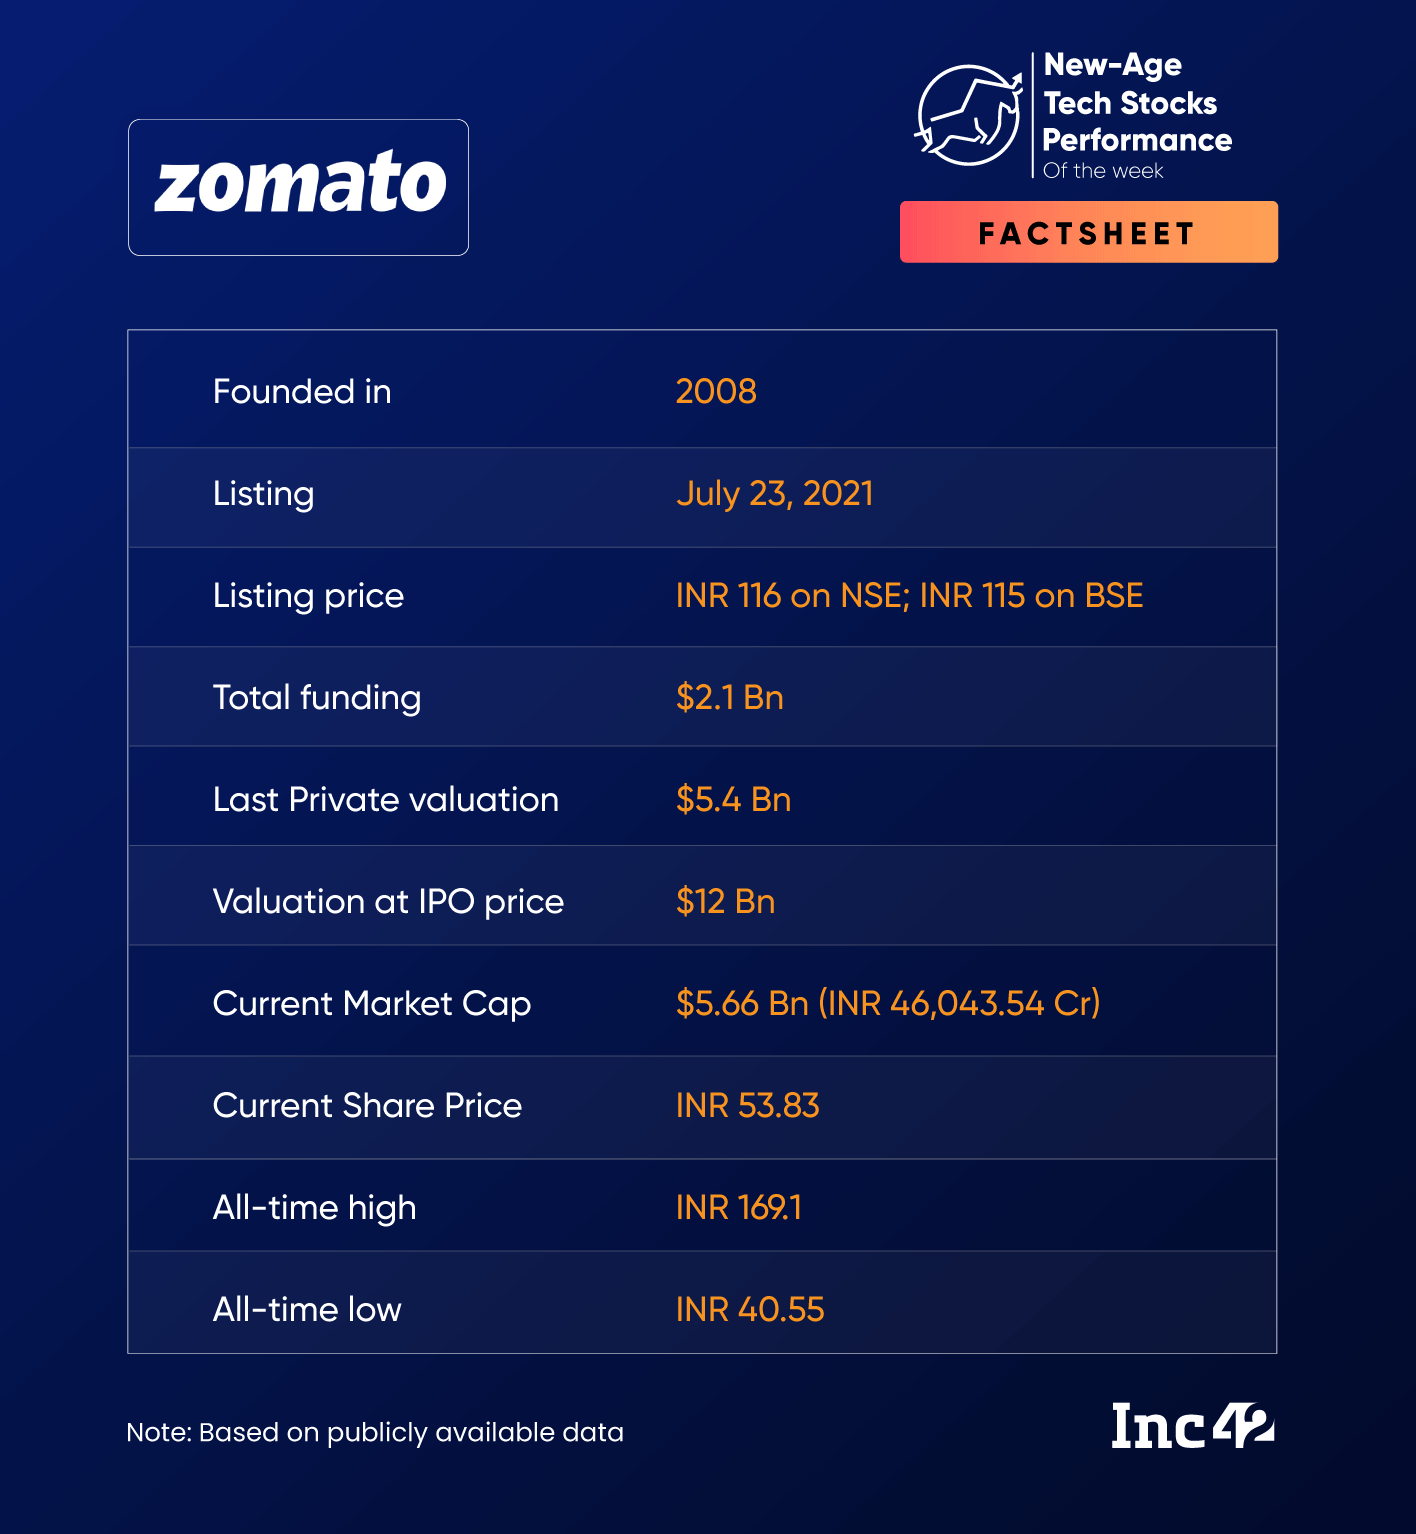 Worries About Zomato’s Q4 Performance